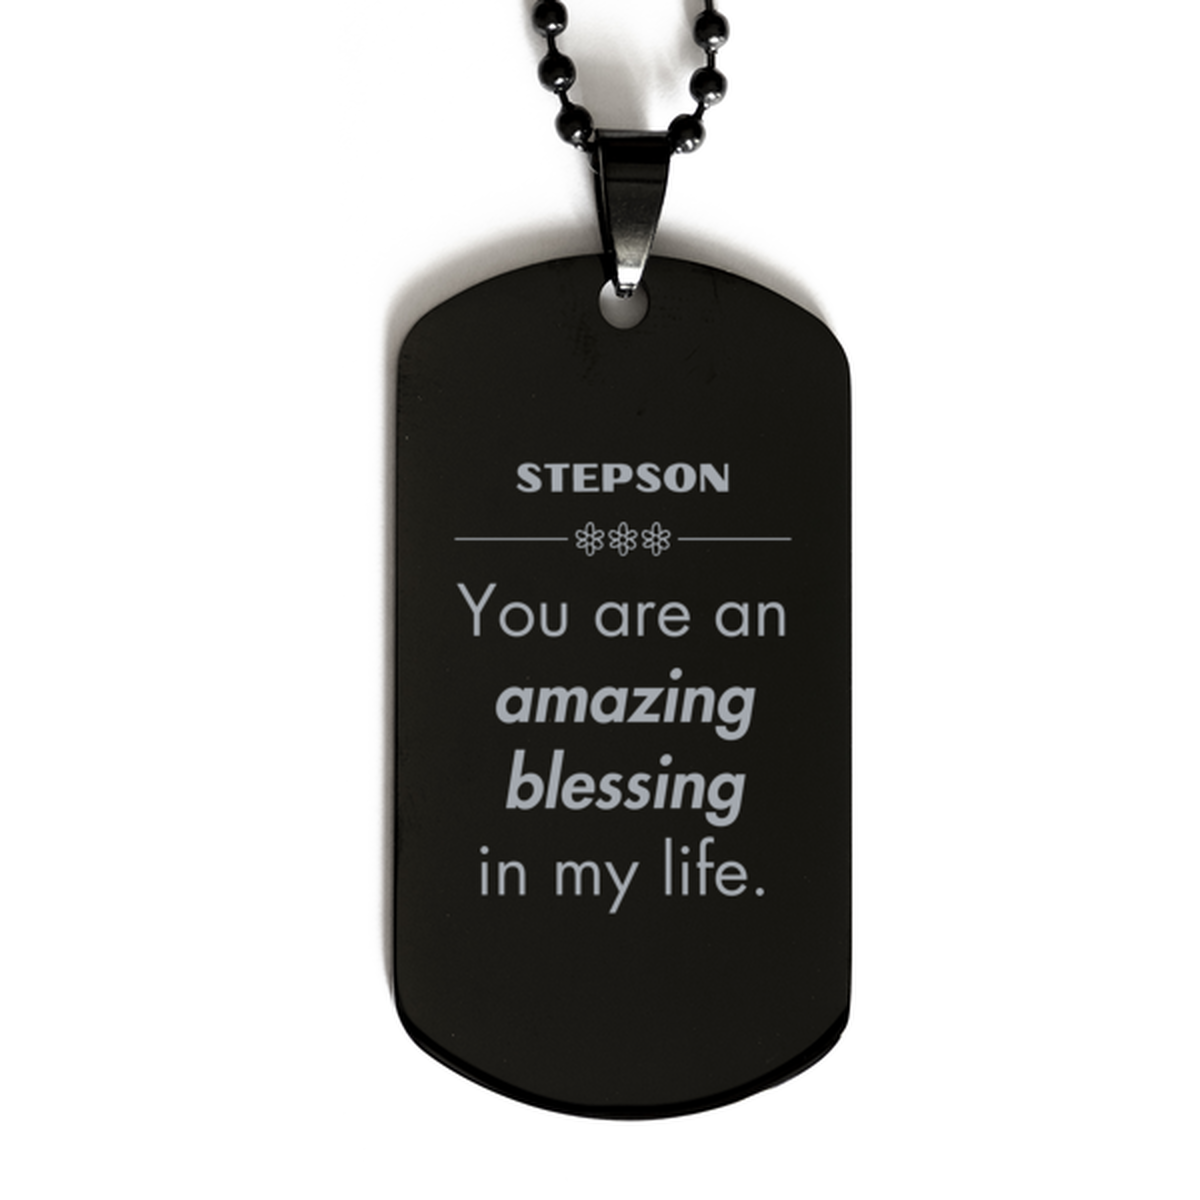 Stepson Black Dog Tag, You are an amazing blessing in my life, Thank You Gifts For Stepson, Inspirational Birthday Christmas Unique Gifts For Stepson